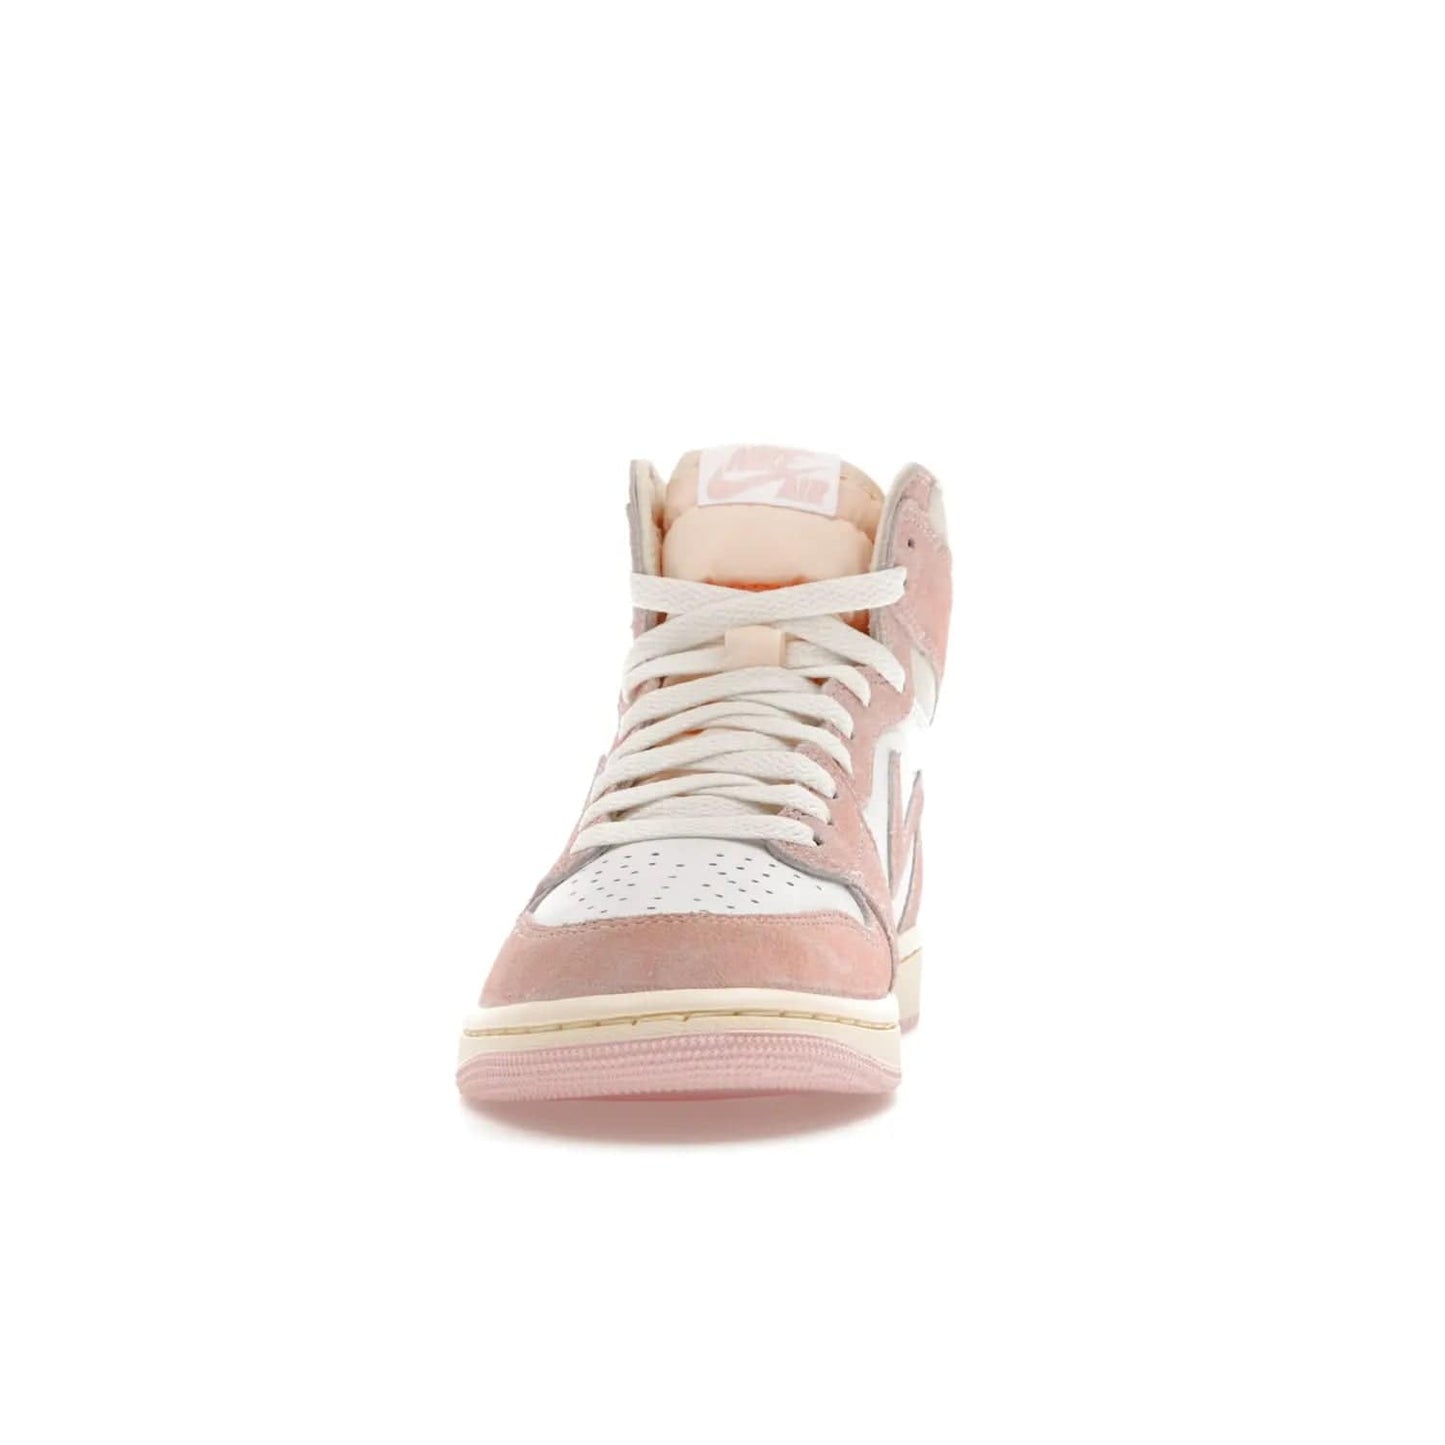 Jordan 1 Retro High OG Washed Pink (Women's) - Image 11 - Only at www.BallersClubKickz.com - Iconic Air Jordan 1 Retro High OG for women with unique pink suede and white leather uppers. Get the timeless look on April 22, 2023.